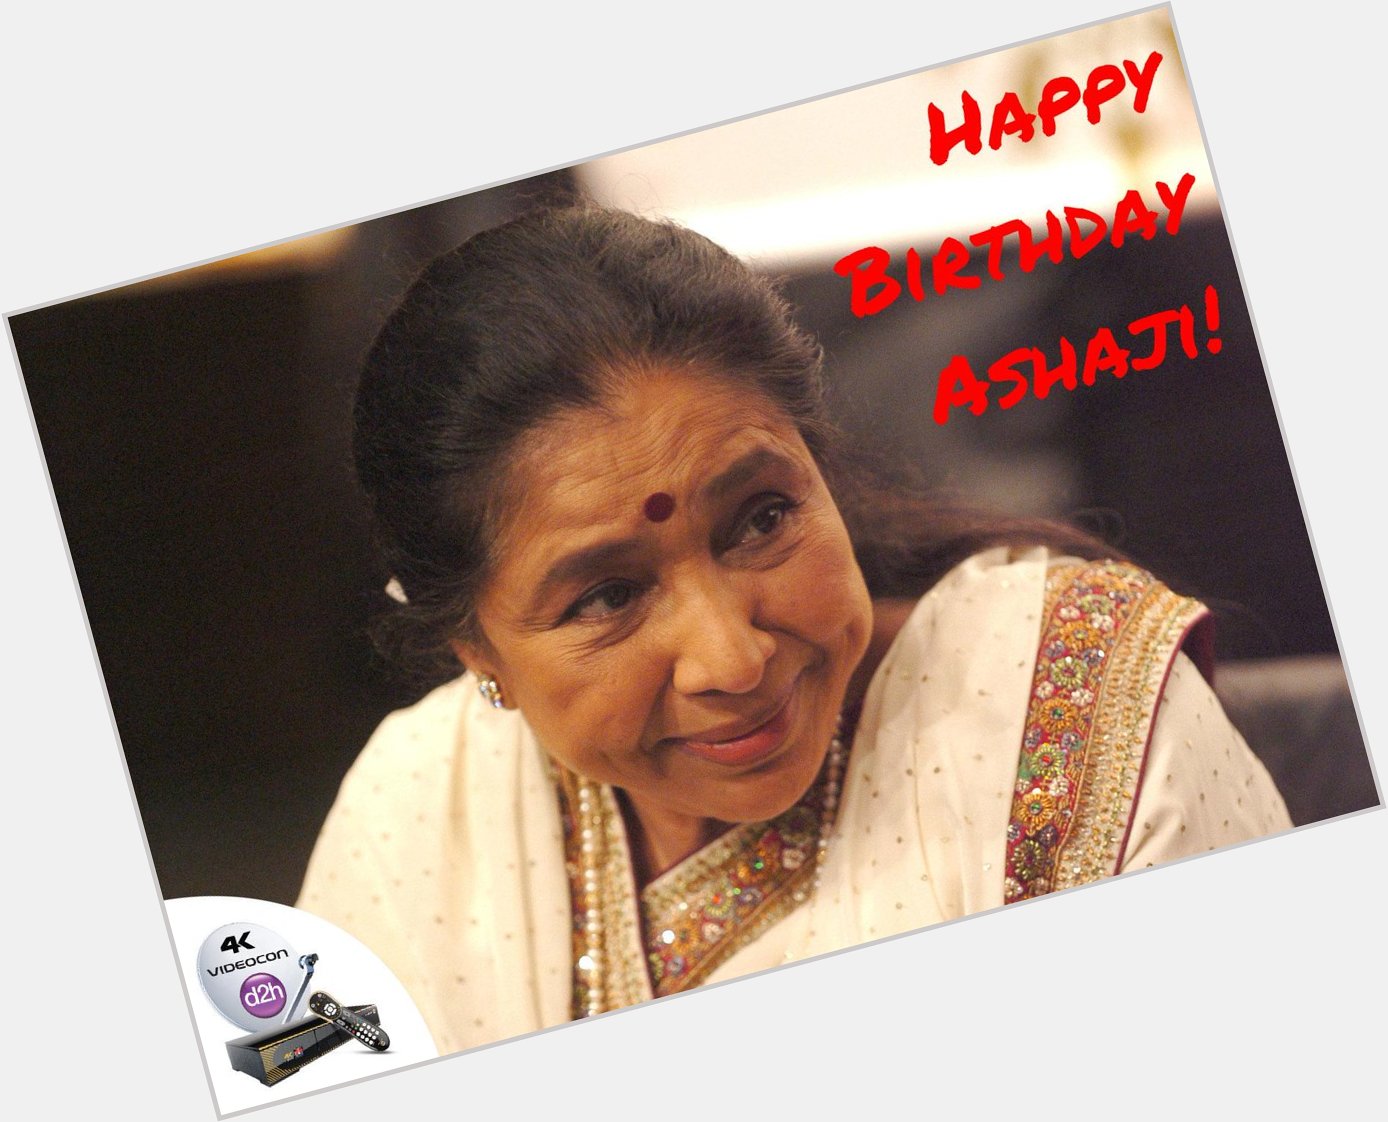 Happy Birthday Asha Bhosle!
Join us in wishing the Queen of Indipop a brilliant year ahead. 